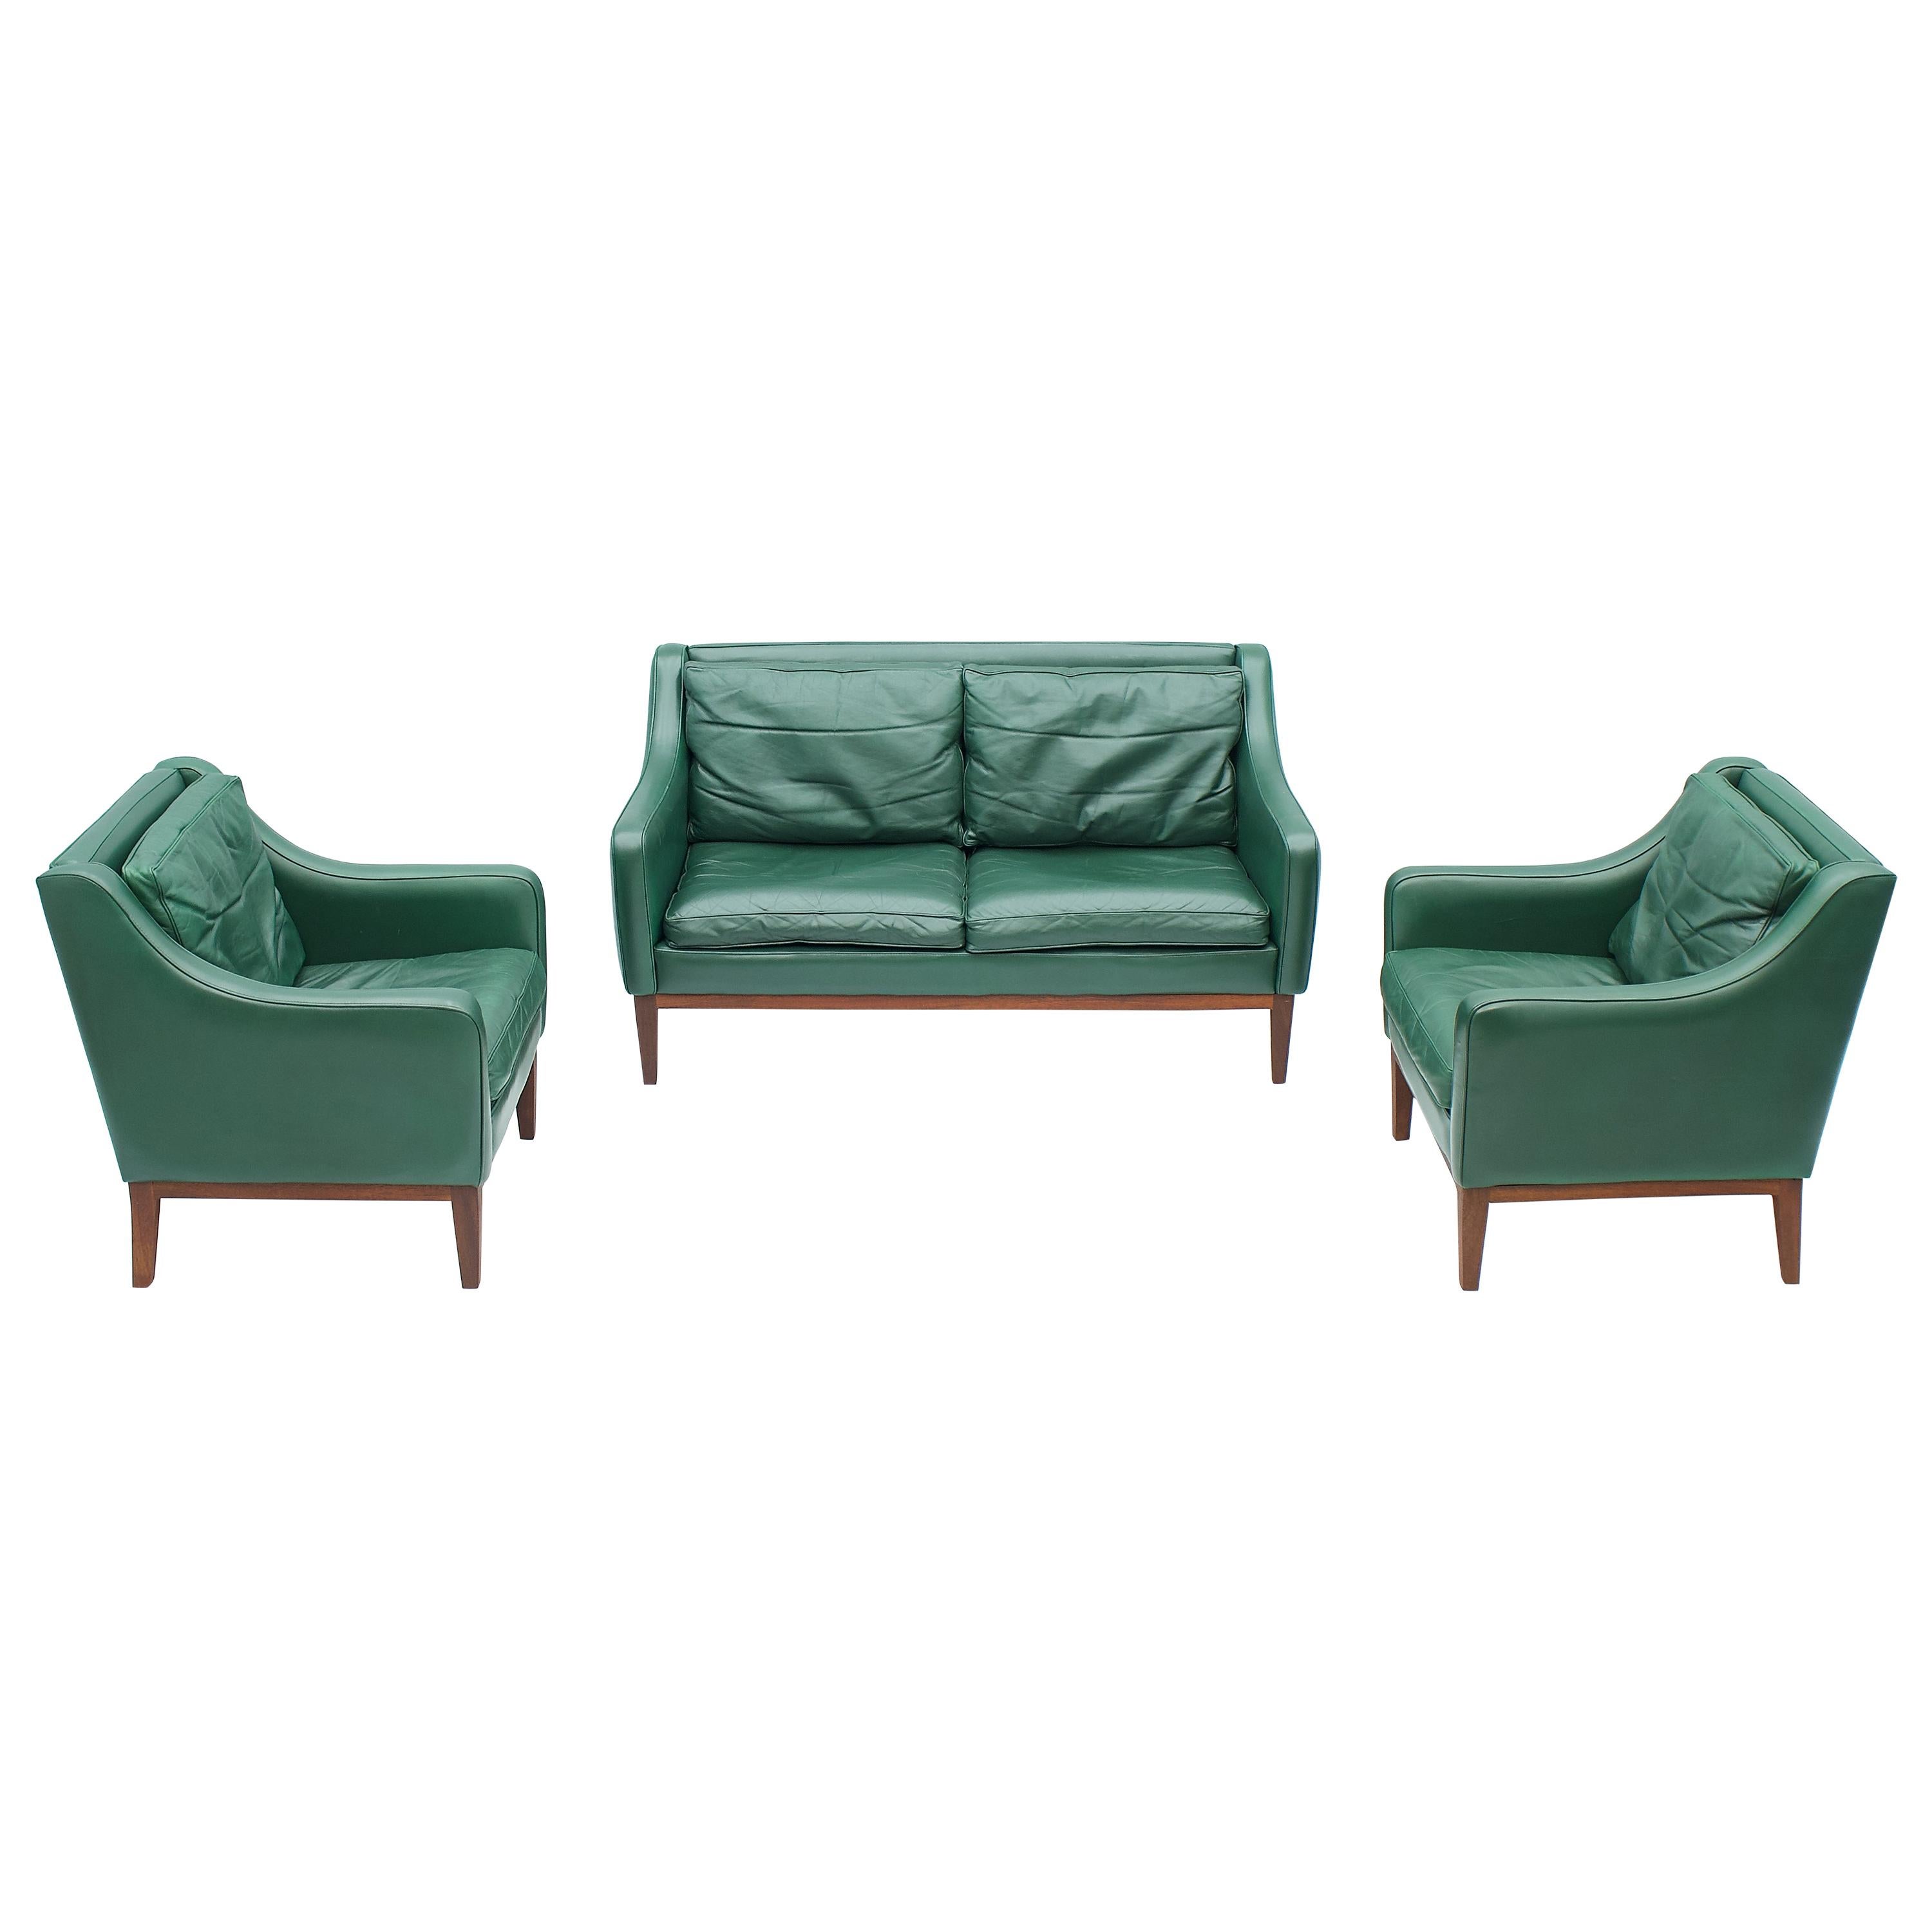 Living Room Set in Green Leather Sofa and Lounge Chairs Italy 1958 Teak For Sale